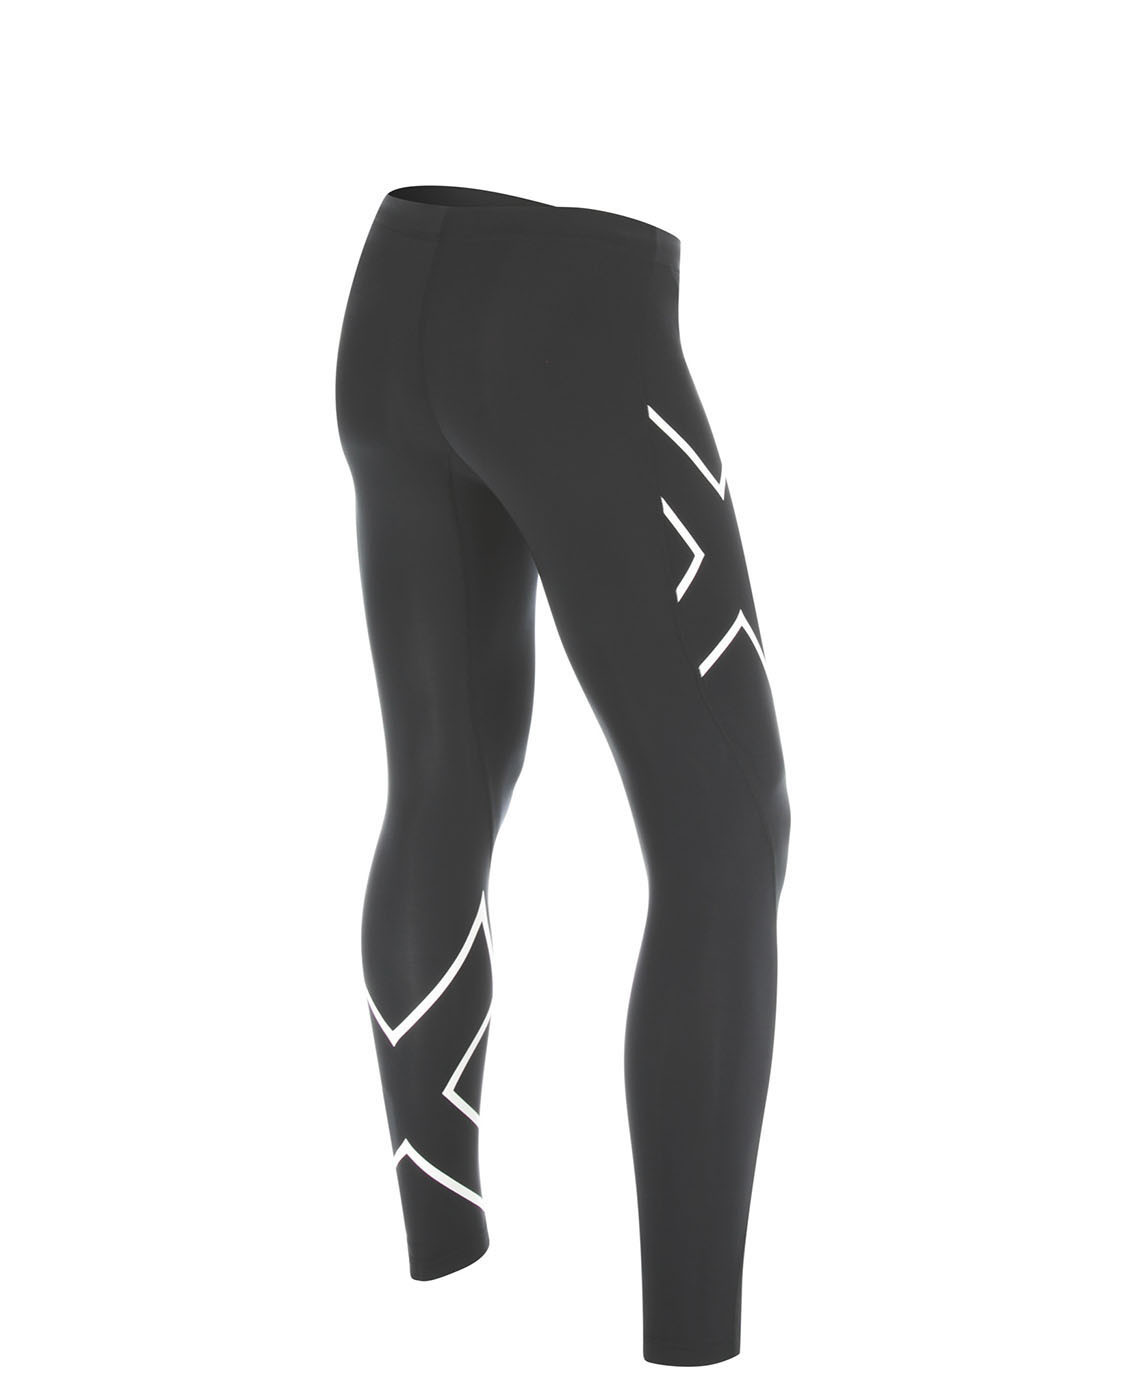 2XU COMPRESSION TROUSERS MEN TR2 COMPRESSION TIGHTS - Running pants - Running - Triathlon wetsuits, shoes, bike and running 2XU, Zoot, x